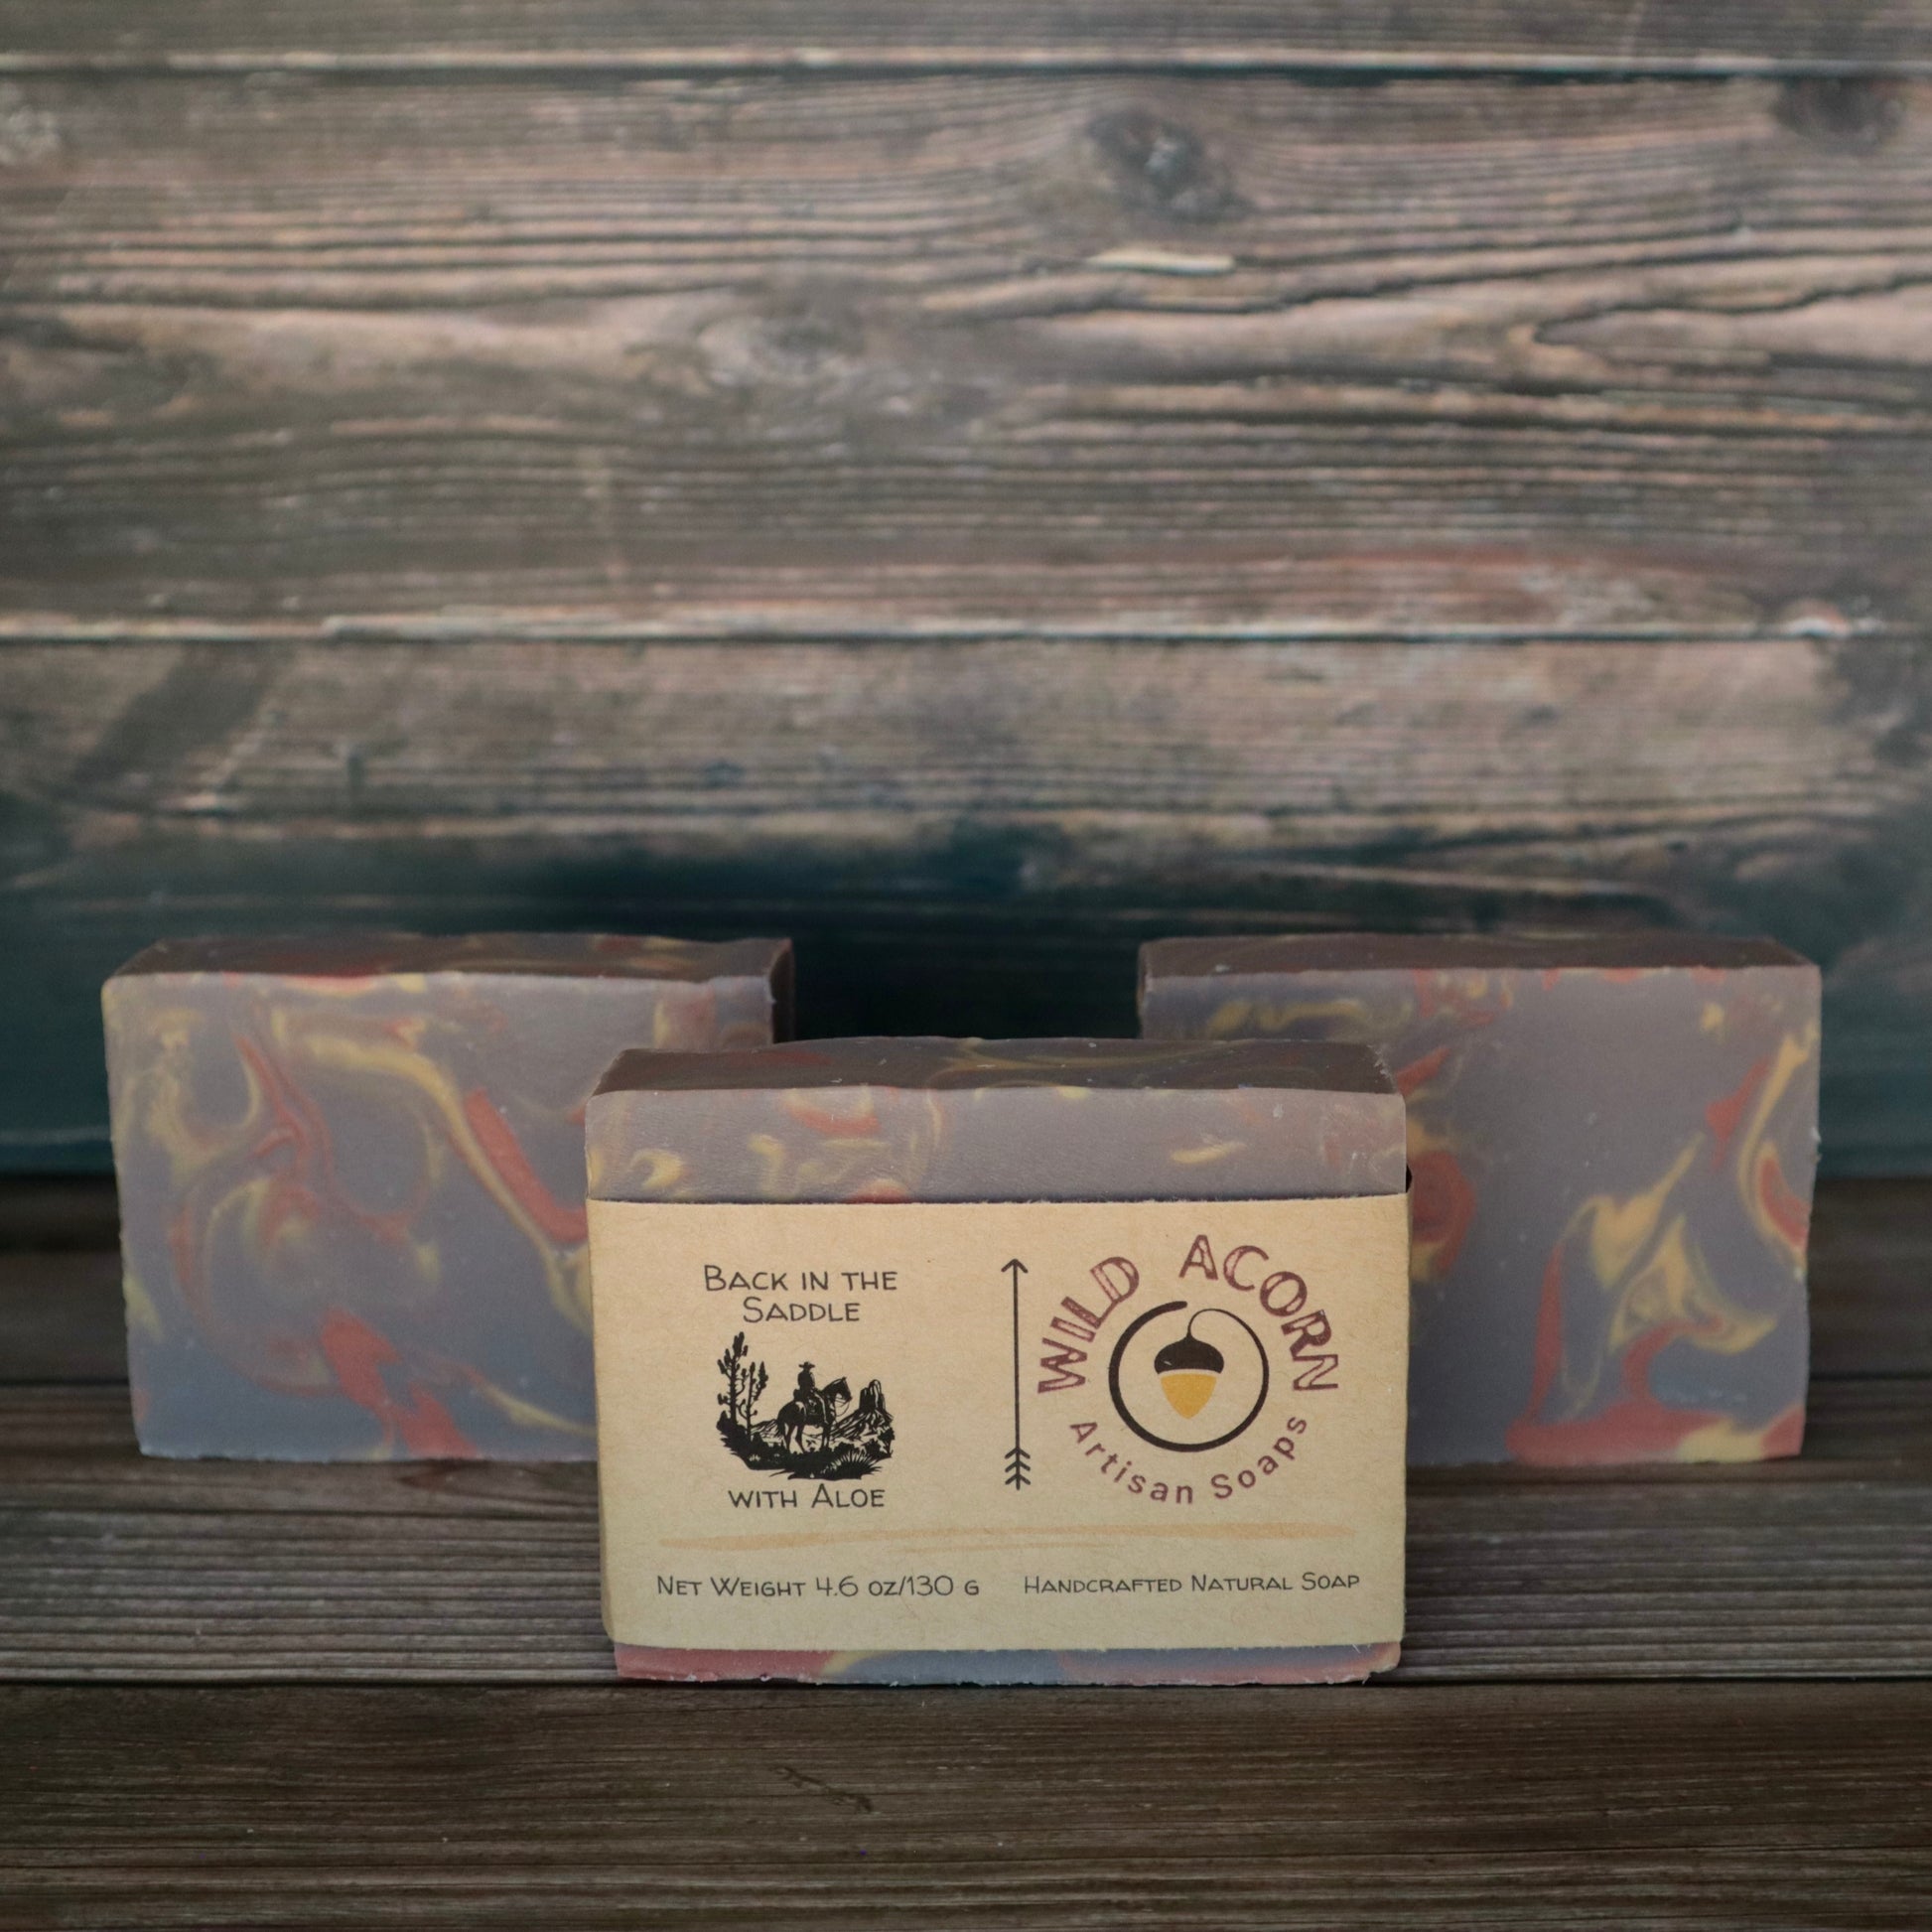 Three bars of soap with orange/red, brown, and cream colored swirls. One bar has a label on it with a picture of a man riding a horse.